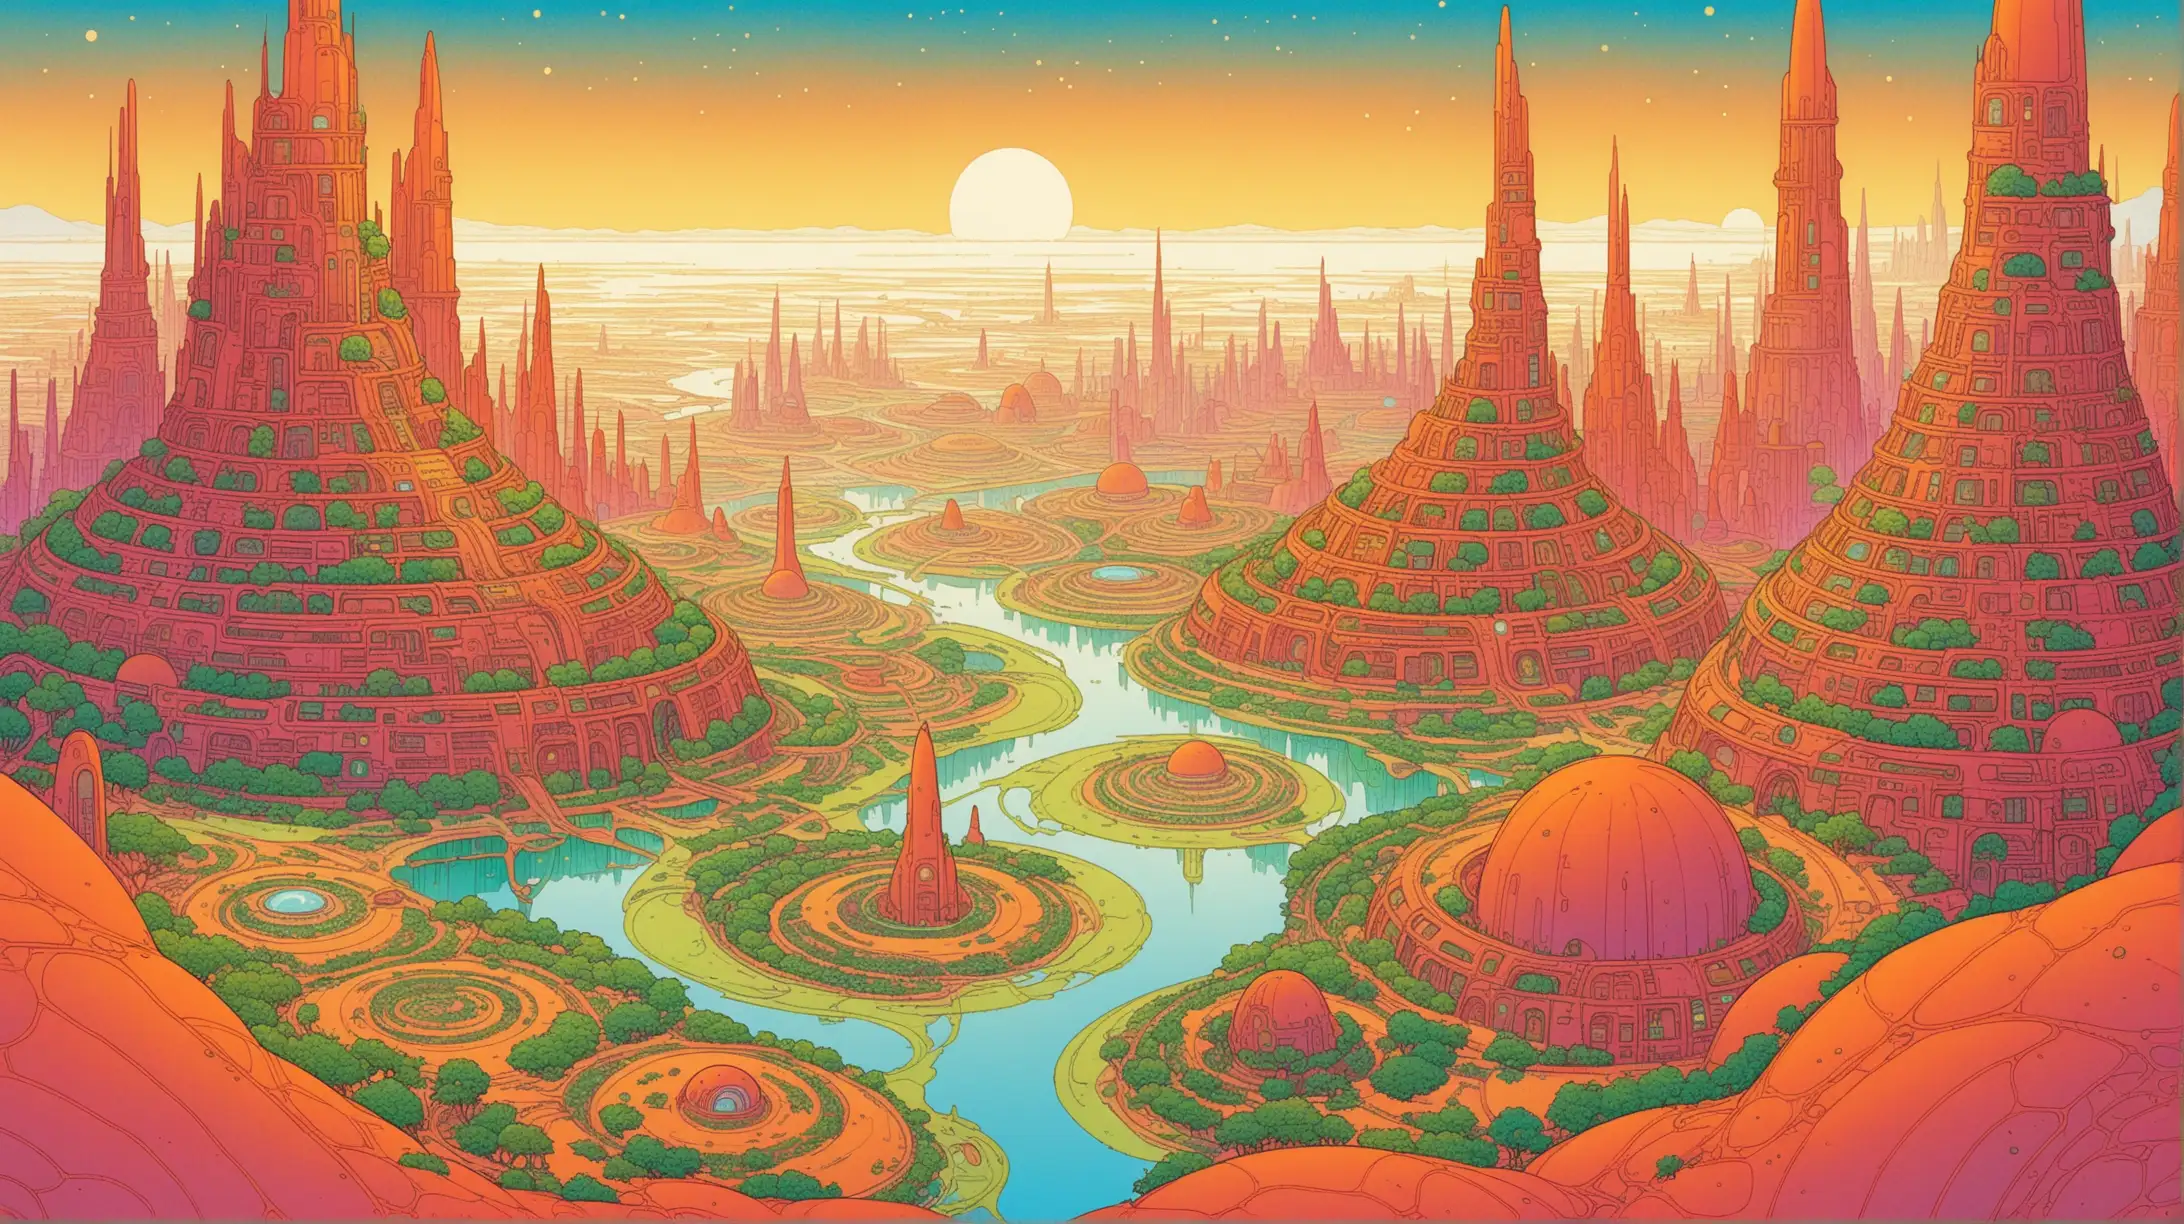 Enchanting Alien Cityscape Detailed Art in Warm Colors by Moebius